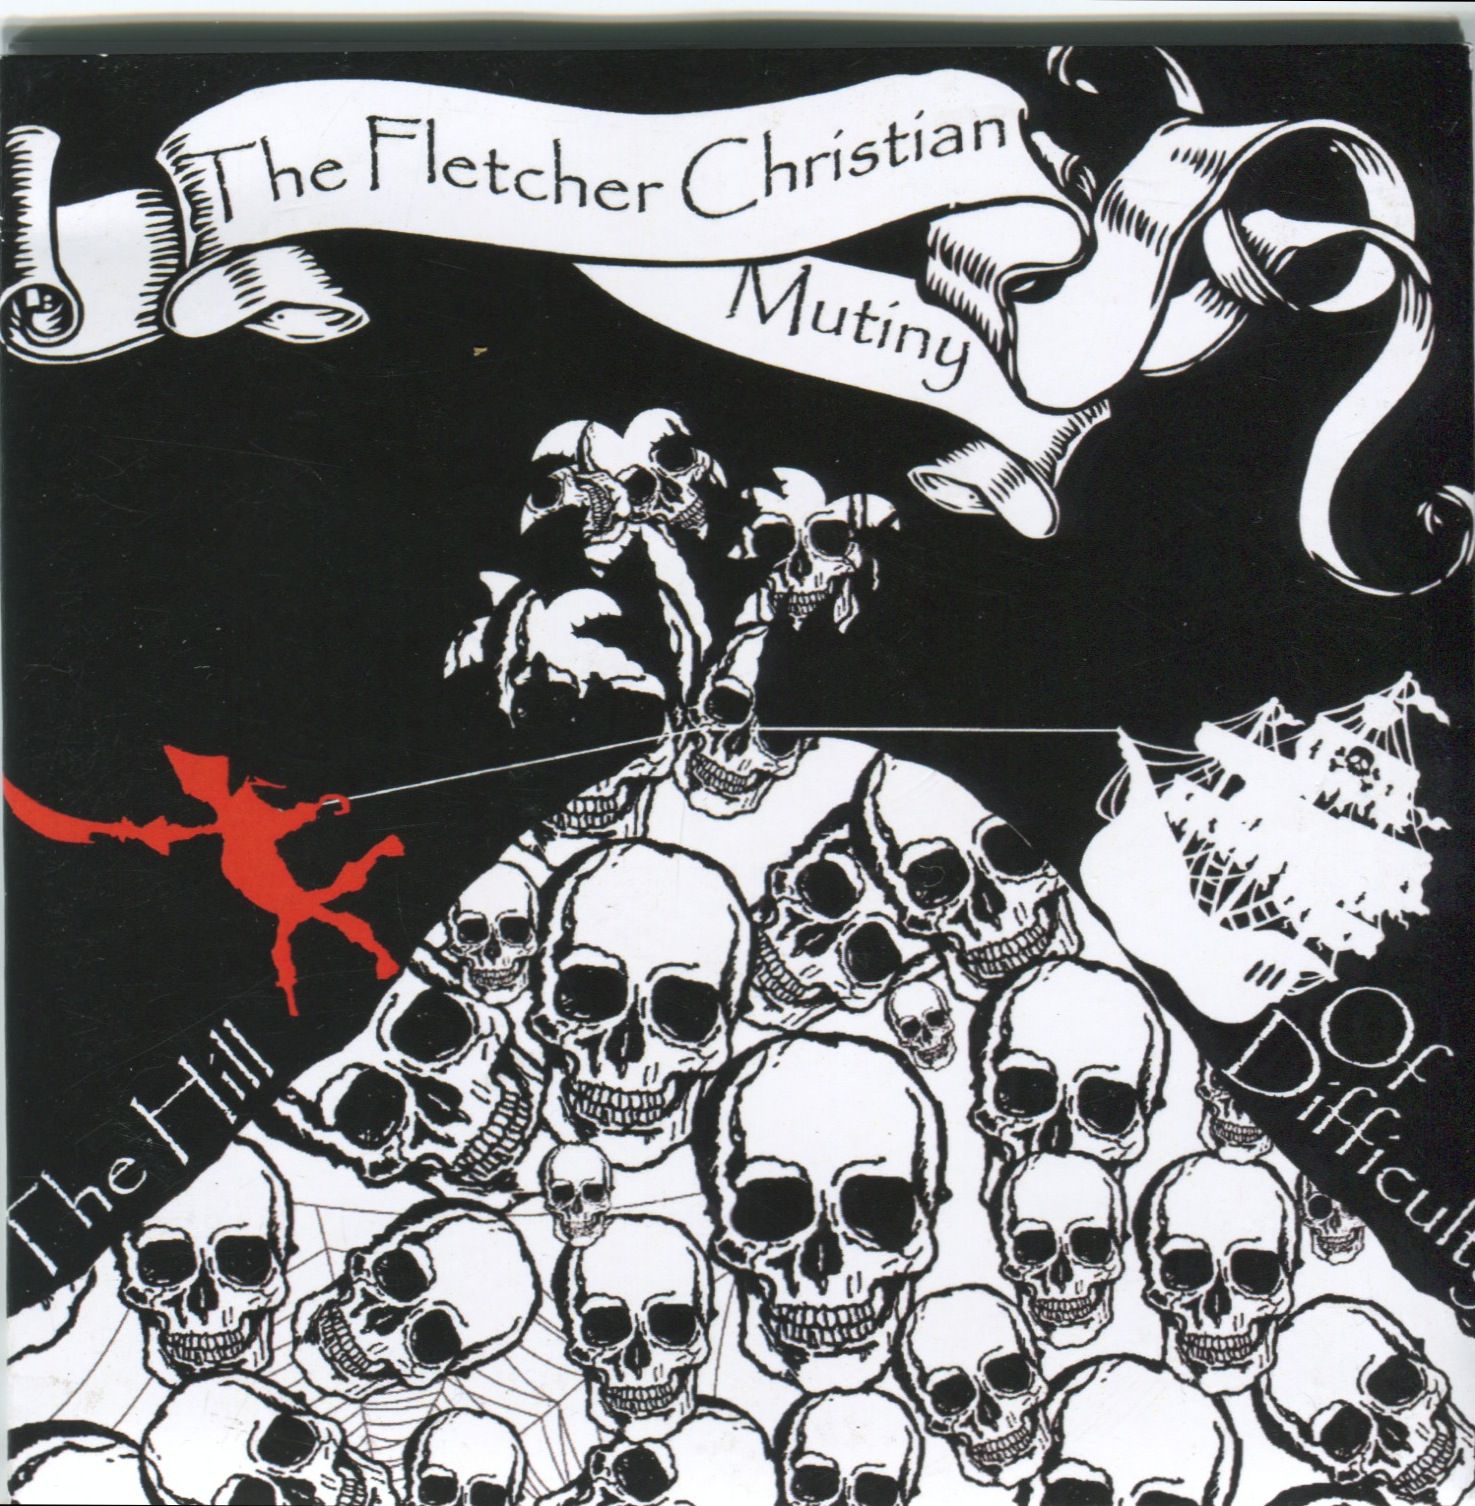 Fletcher Christian - Hill of Difficulty cover artwork